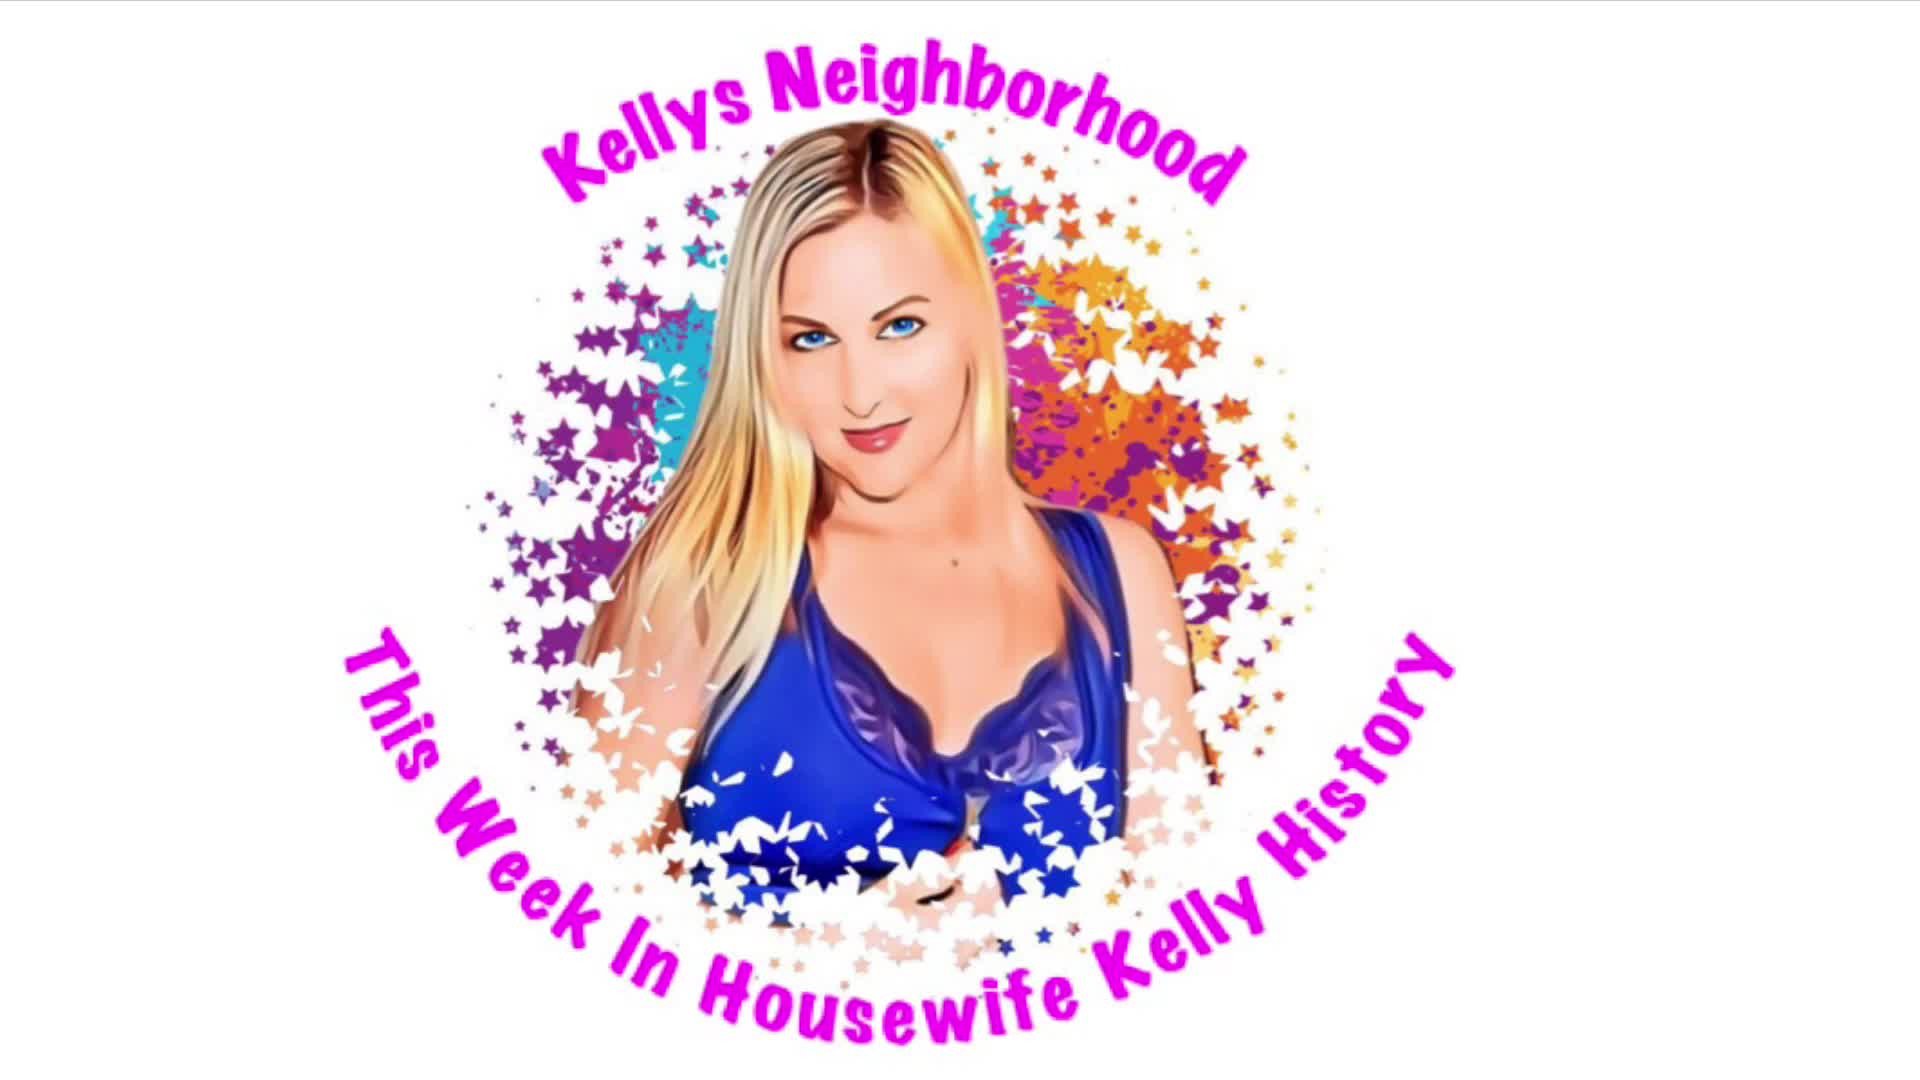 Shared Video by Kellys Neighborhood with the username @KellysNeighbor, who is a star user,  March 27, 2024 at 9:57 AM. The post is about the topic Kinky Couples